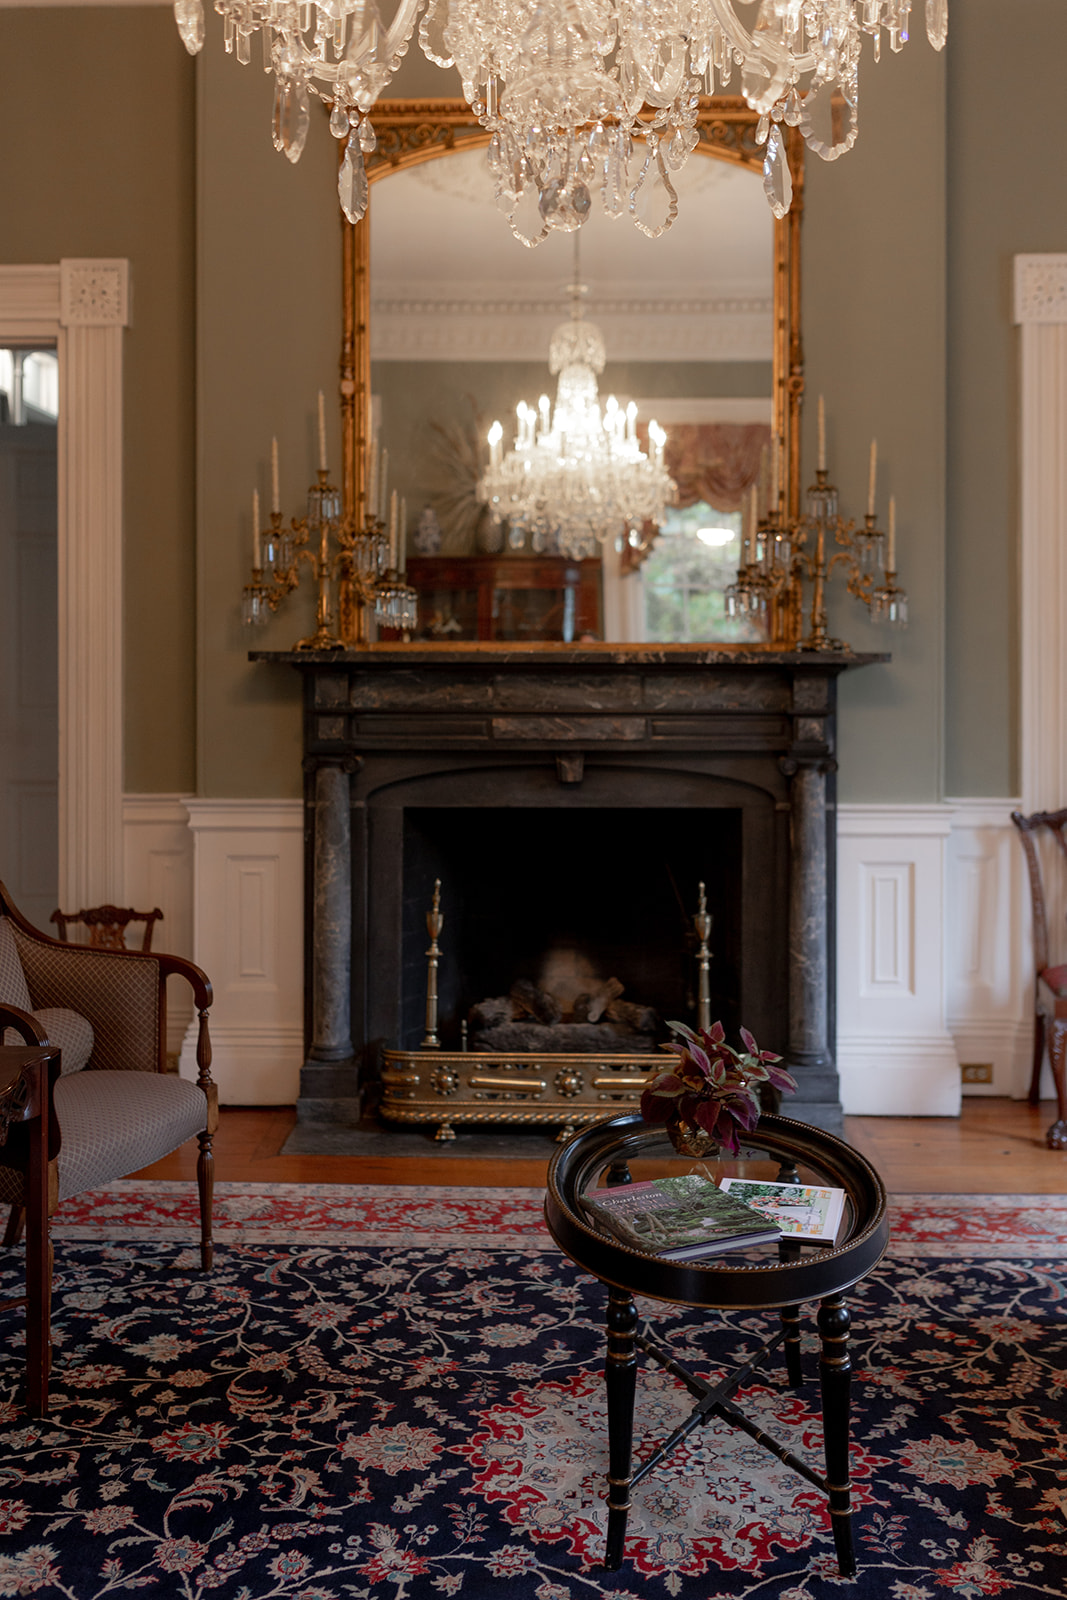 Fireplace at Gov. Thomas Bennett House. Mirror hung above it with chairs and small coffee table in the front.